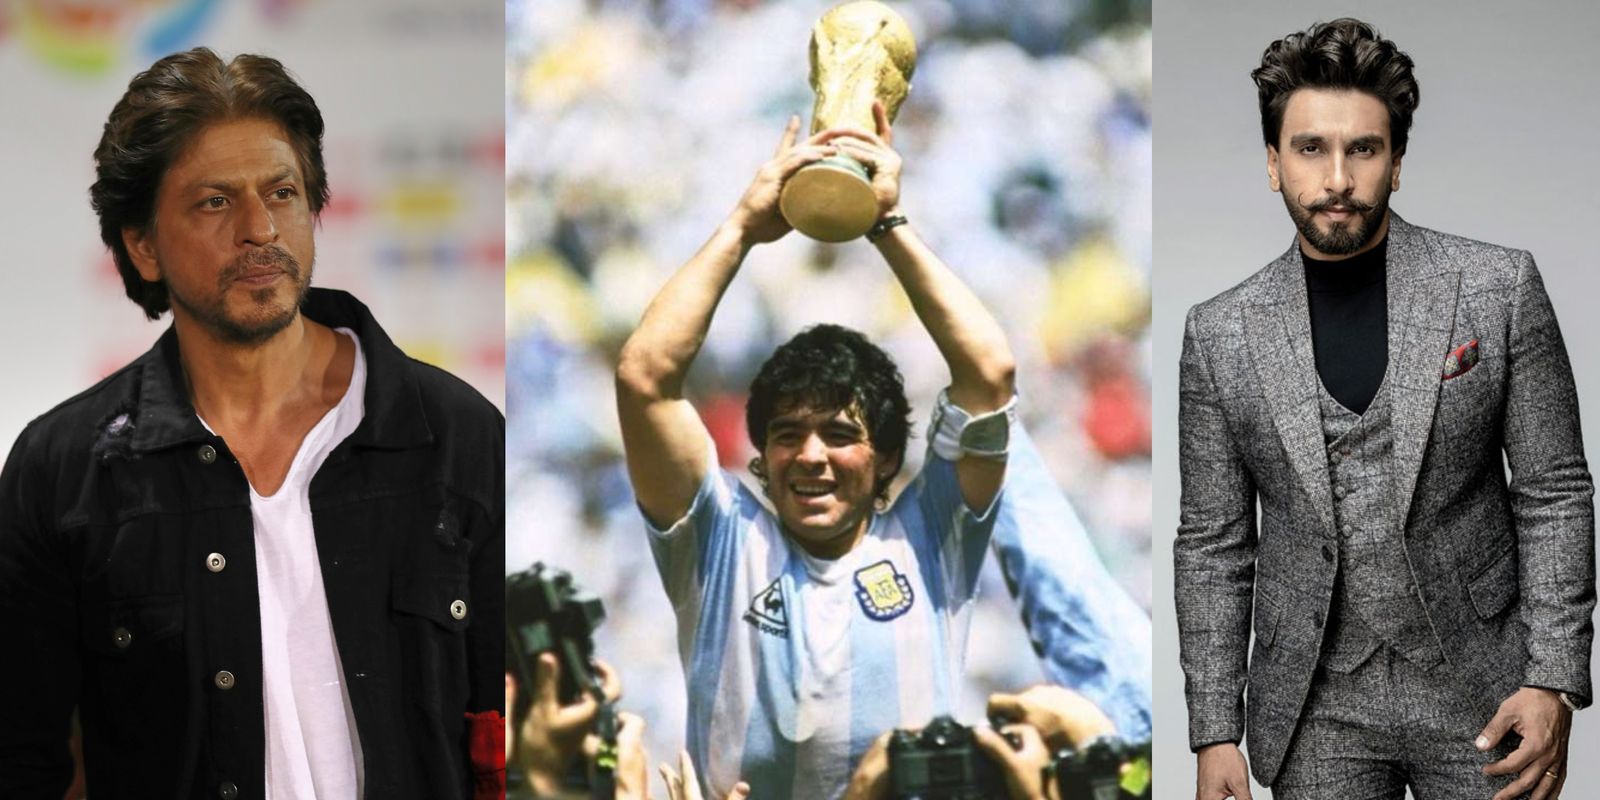 Diego Maradona Passes Away At 60; Shah Rukh Khan, Ranveer Singh, Vicky Kaushal And Other Celebs Pay Homage To The Legend